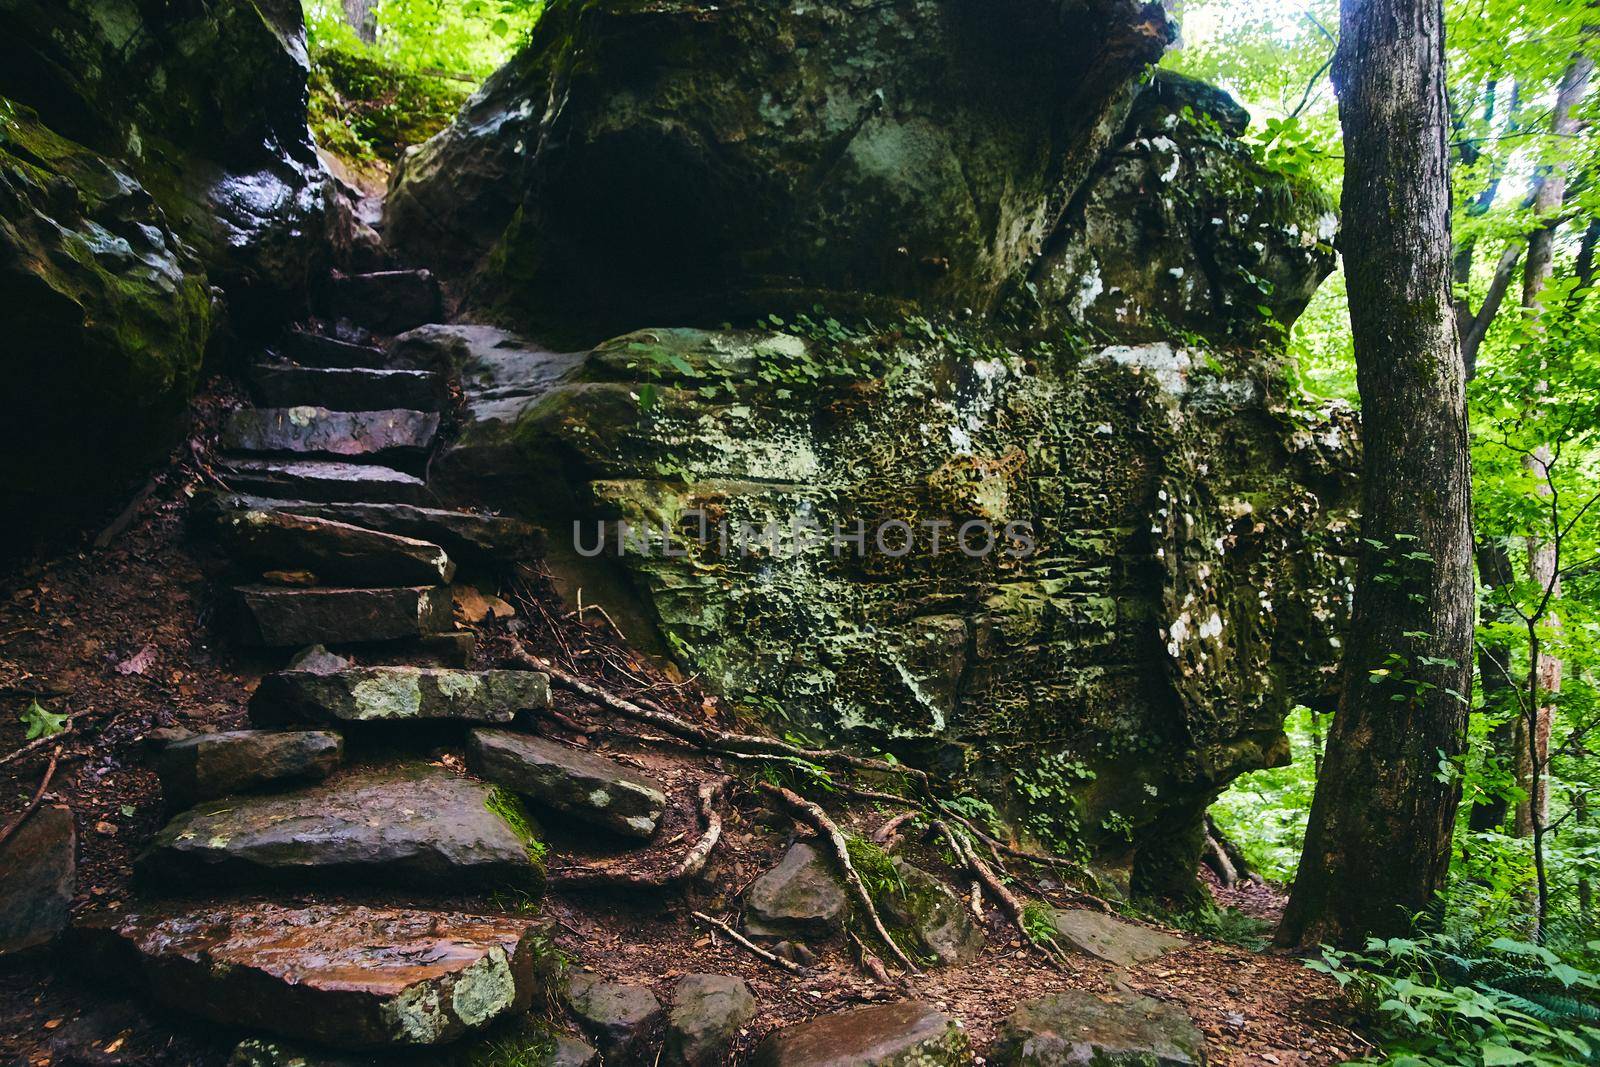 Image of Hiking trail of stone steps up into rocks covered in lichen